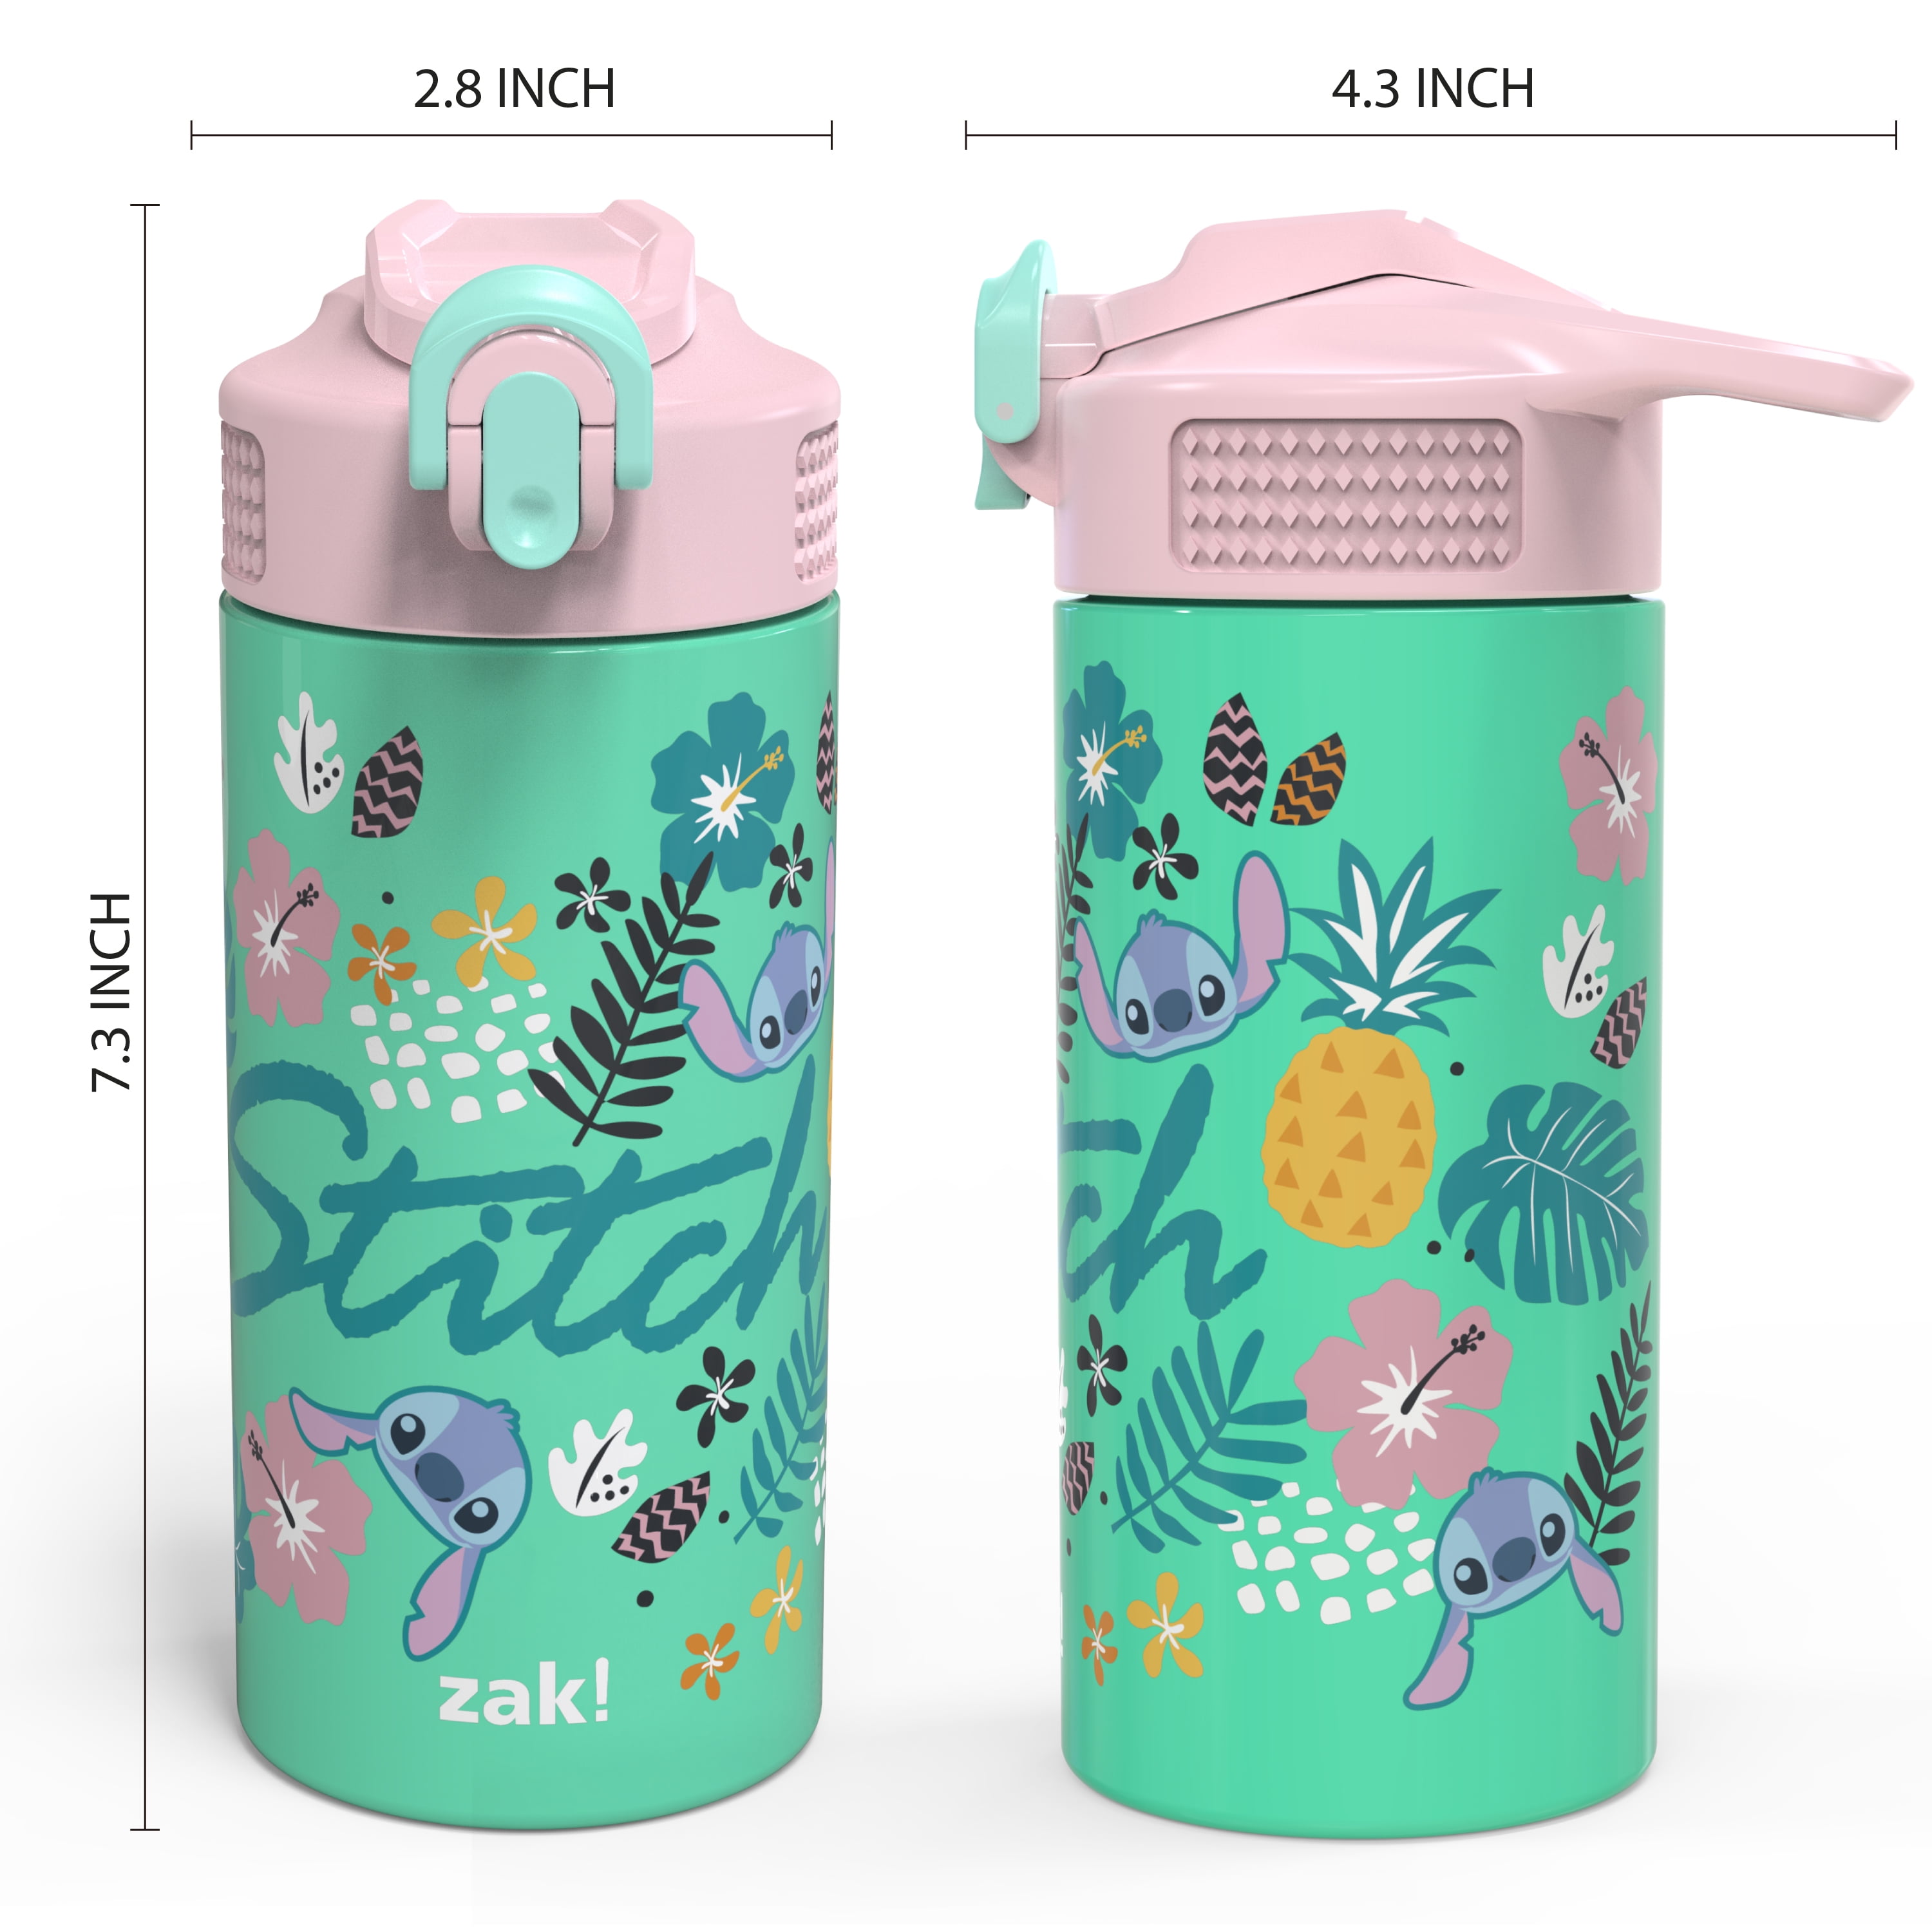 Zak Designs 20oz Stainless Steel Kids' Water Bottle with Antimicrobial Spout 'Disney Lilo and Stitch